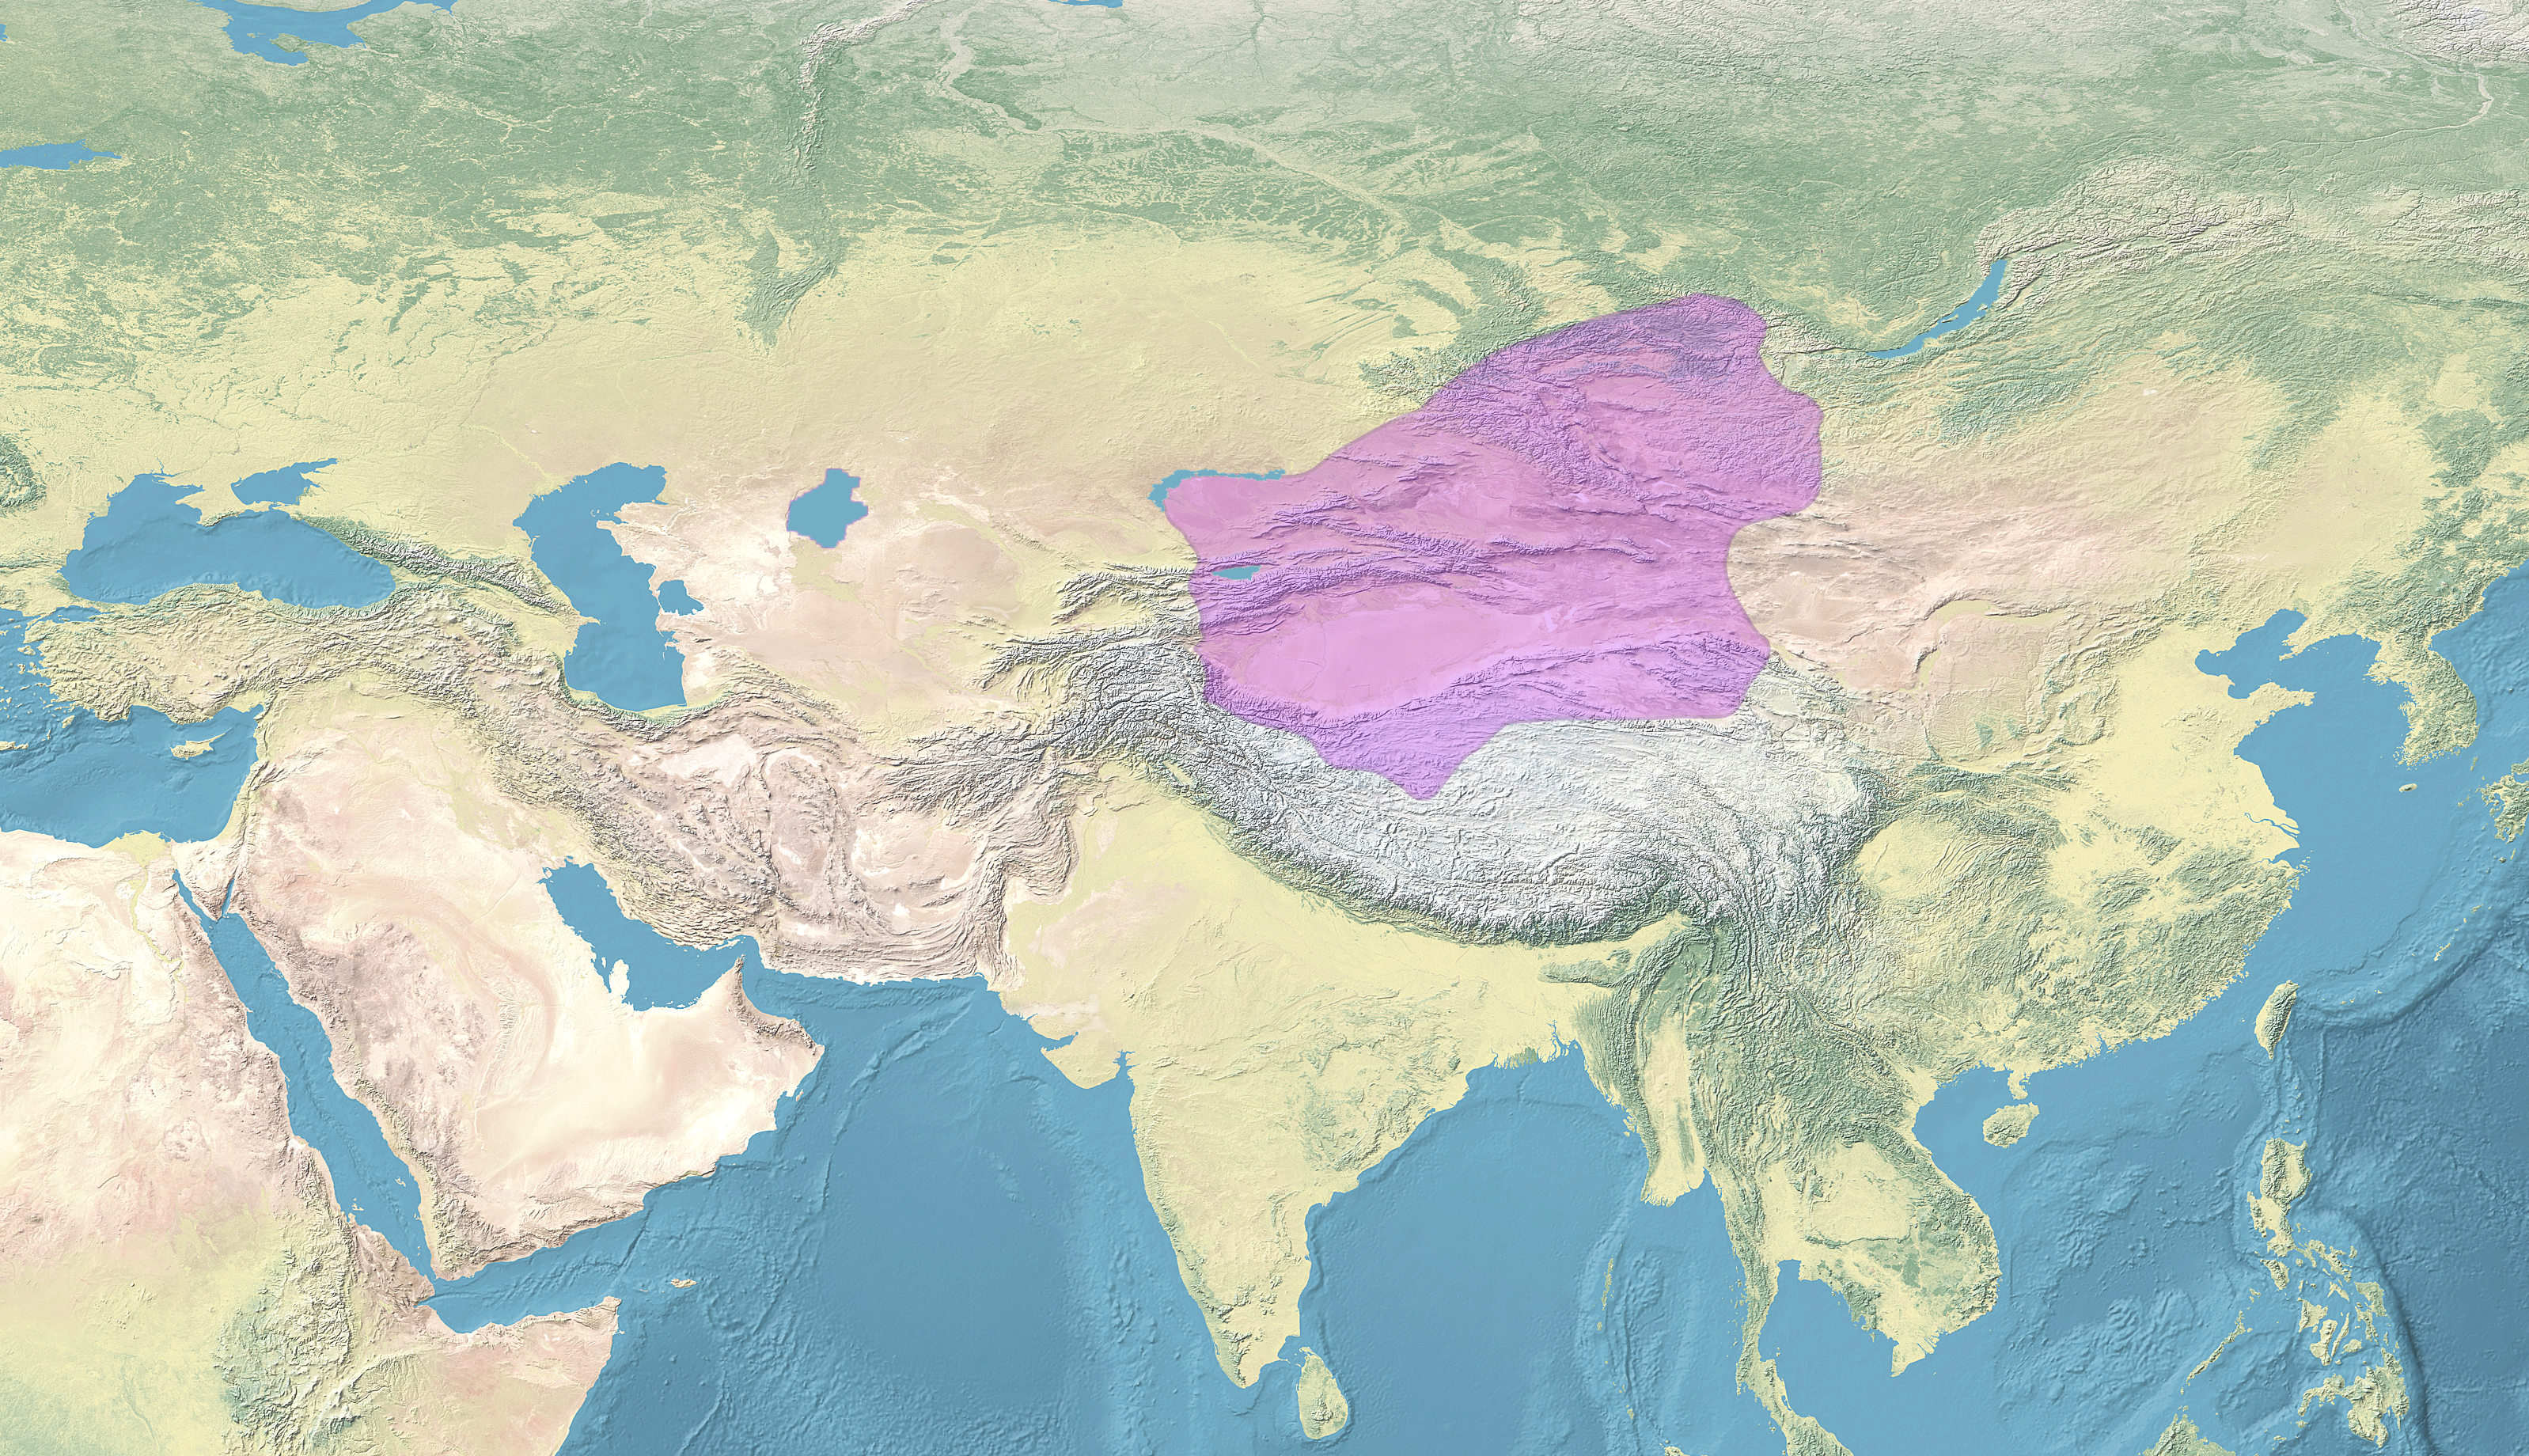 This map depicts A) the greatest extent of the Mongol Empire. B